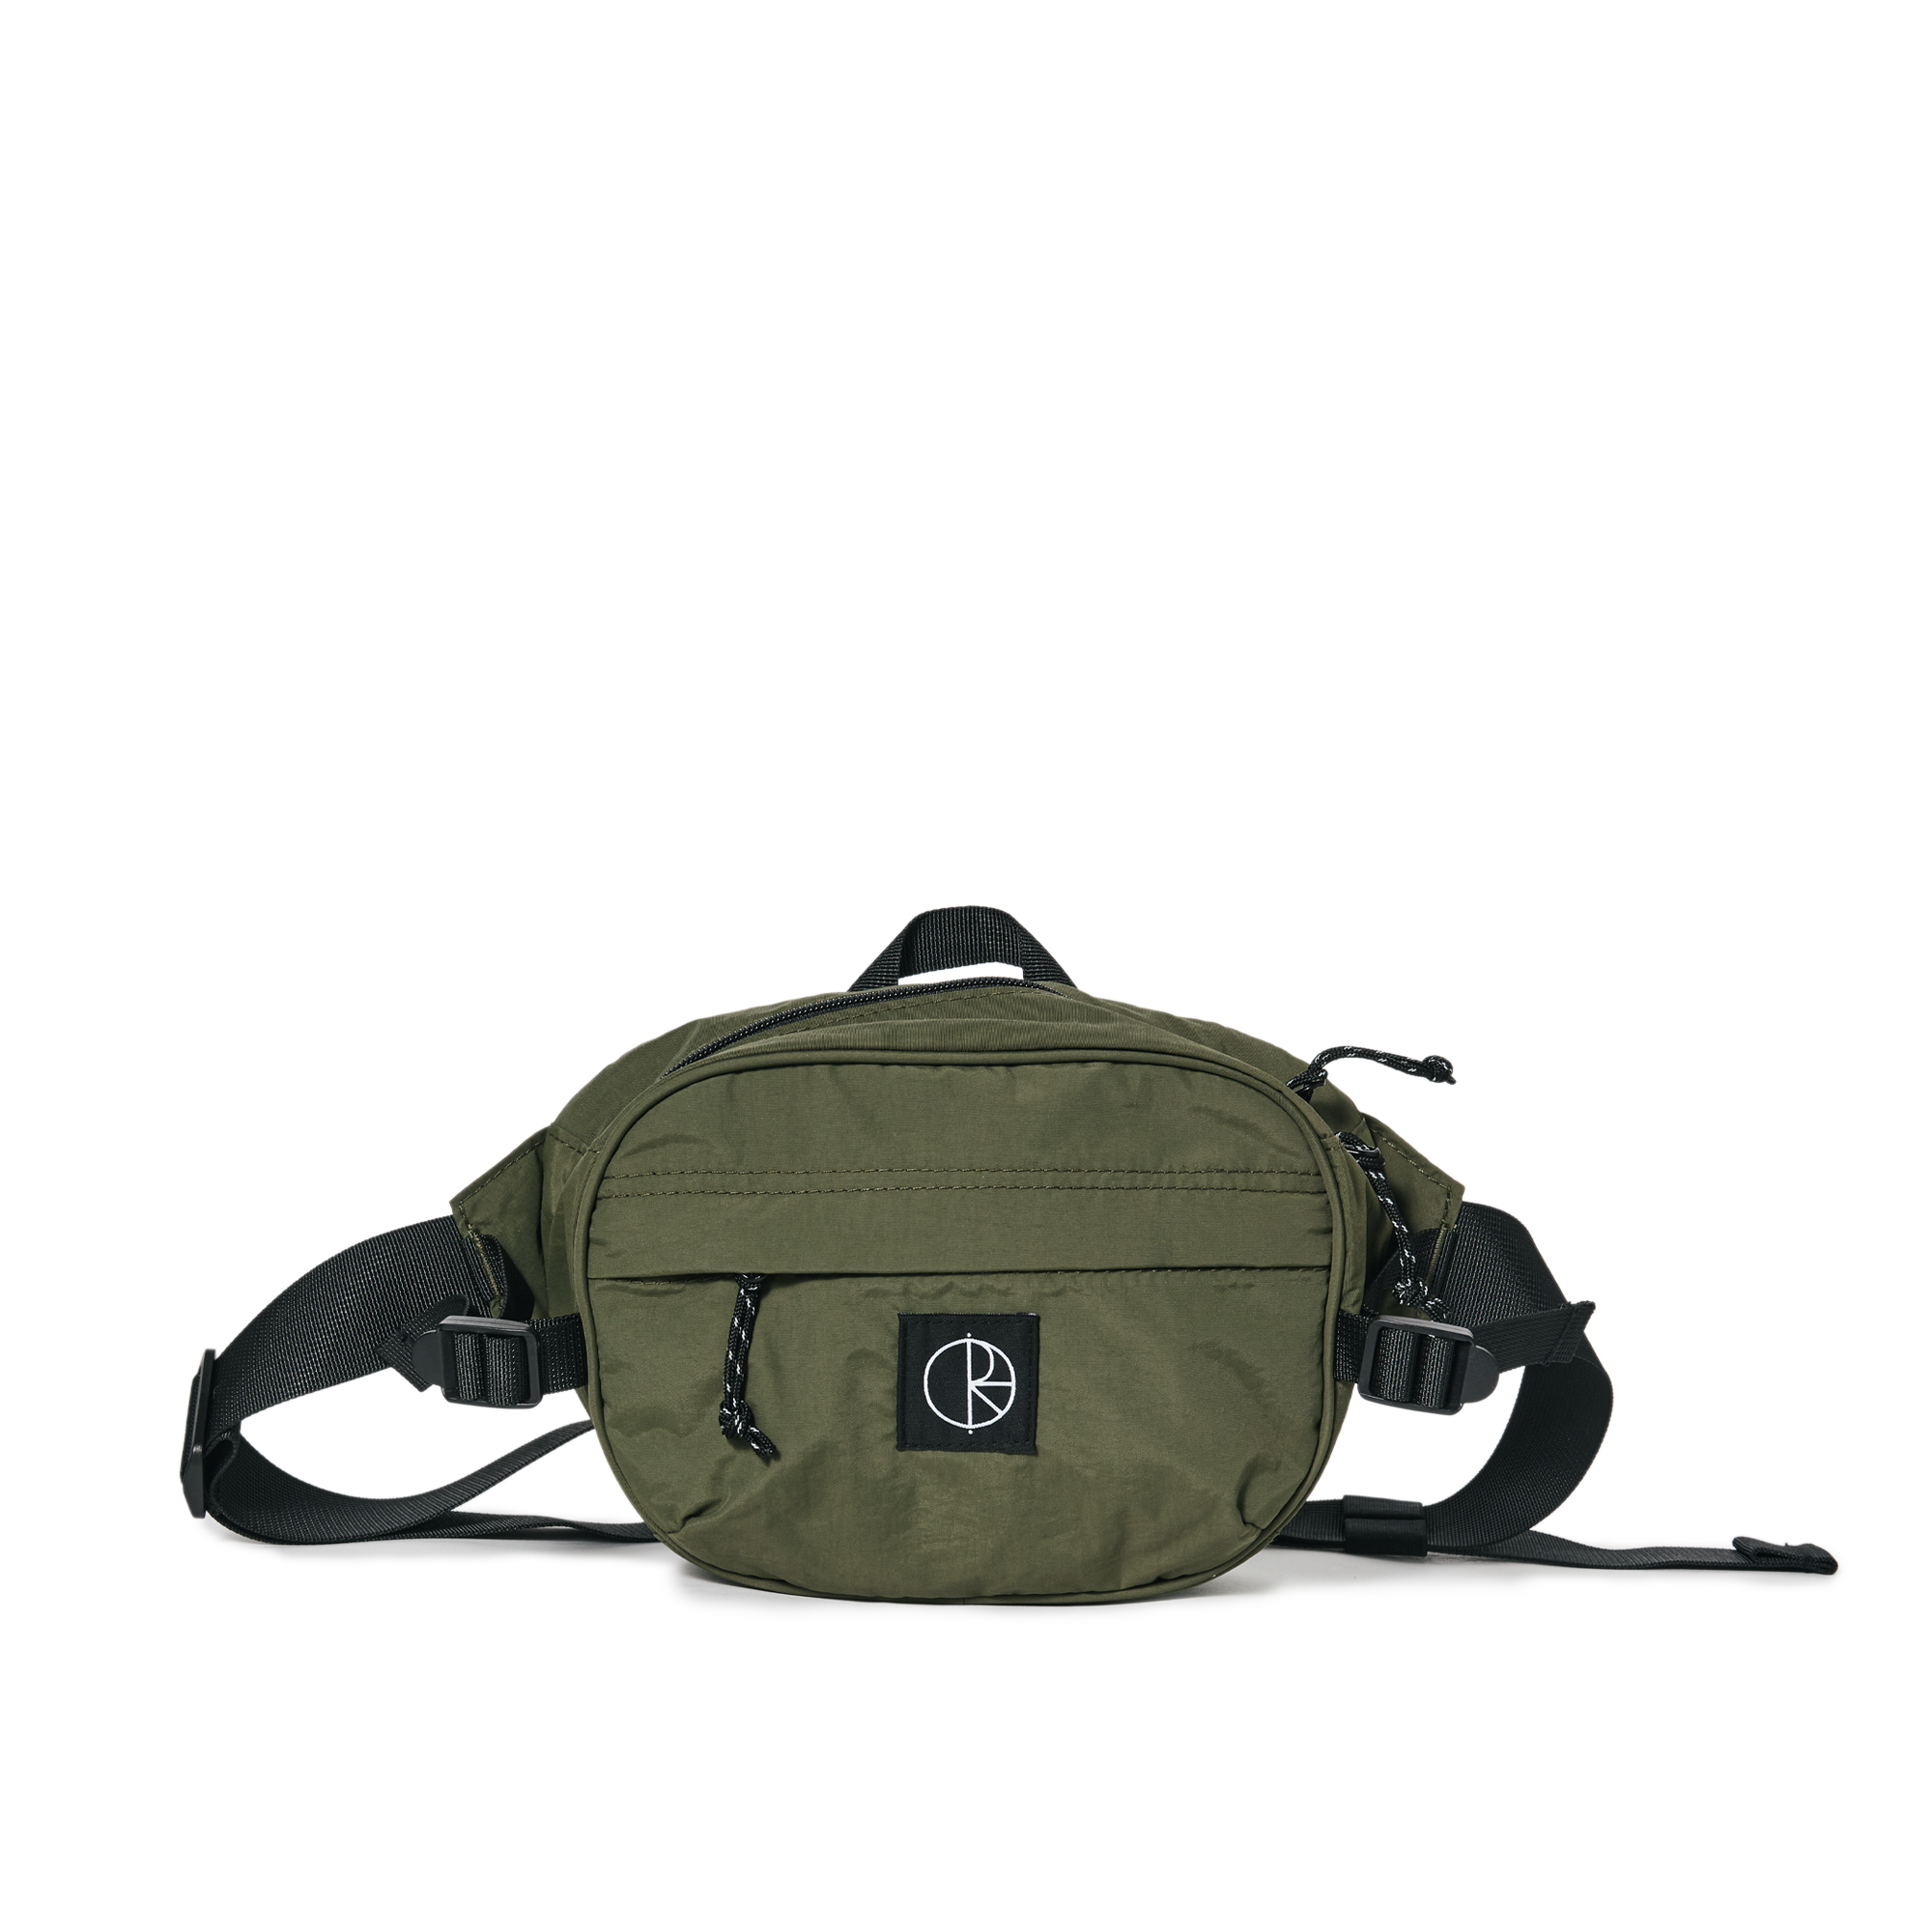 Olive green polar nylon hip bag with black patch logo on front. Card and cash pockets inside. Free uk shipping on orders over £50